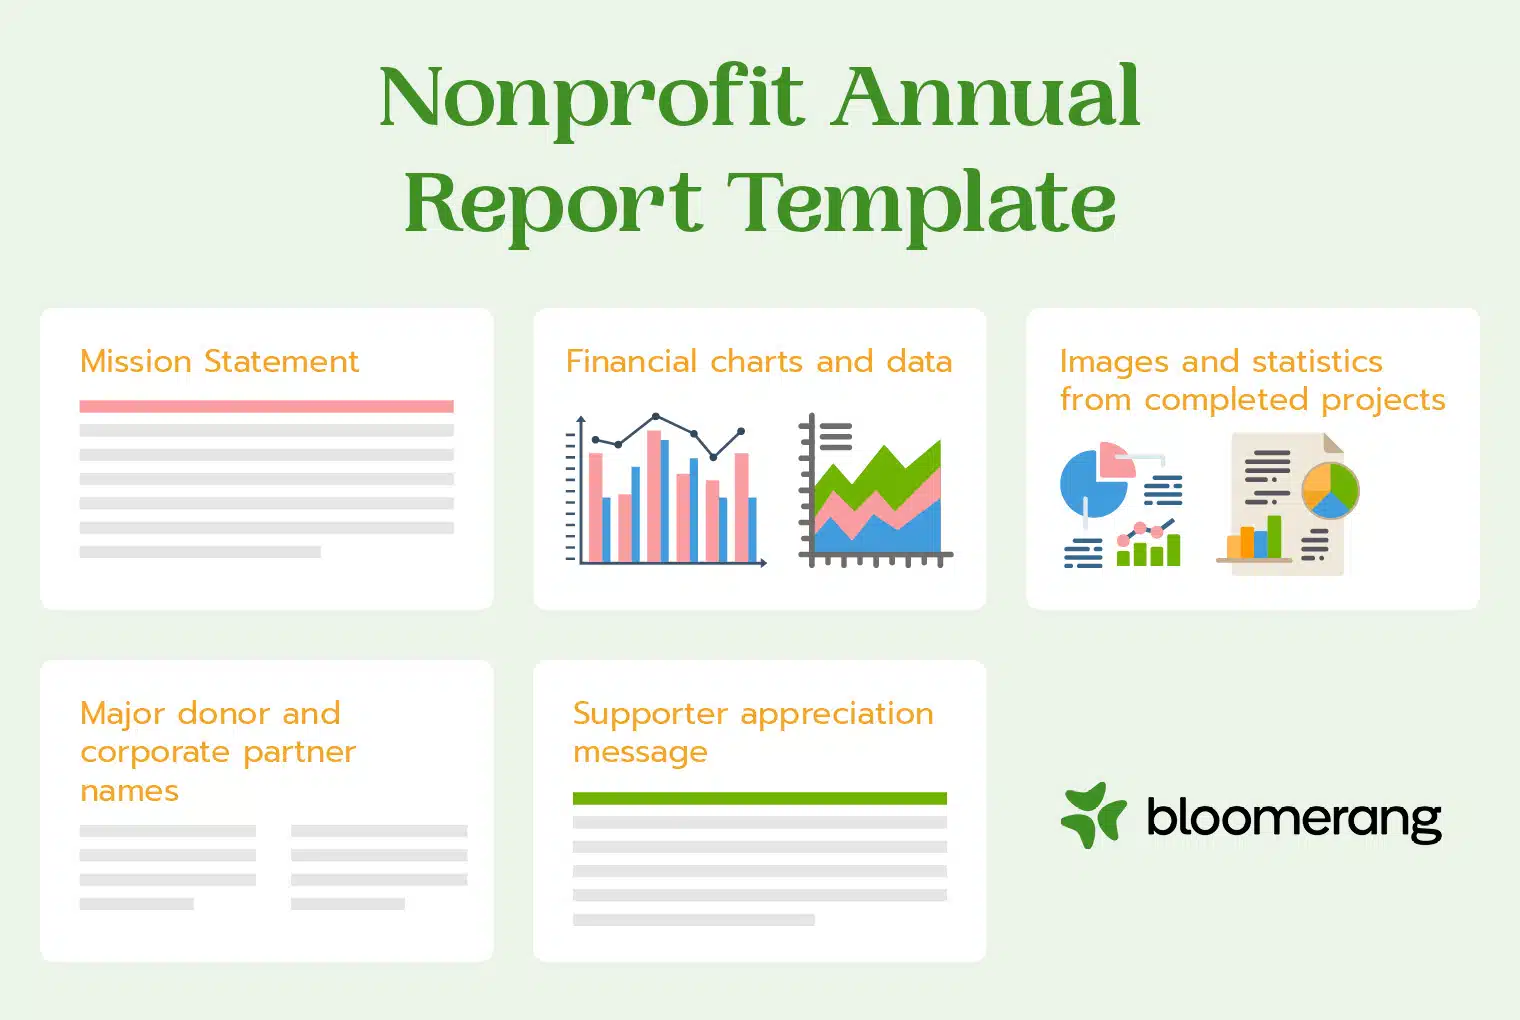 This basic template shows the essential elements of a nonprofit annual report, which are described in more detail in the text below. 